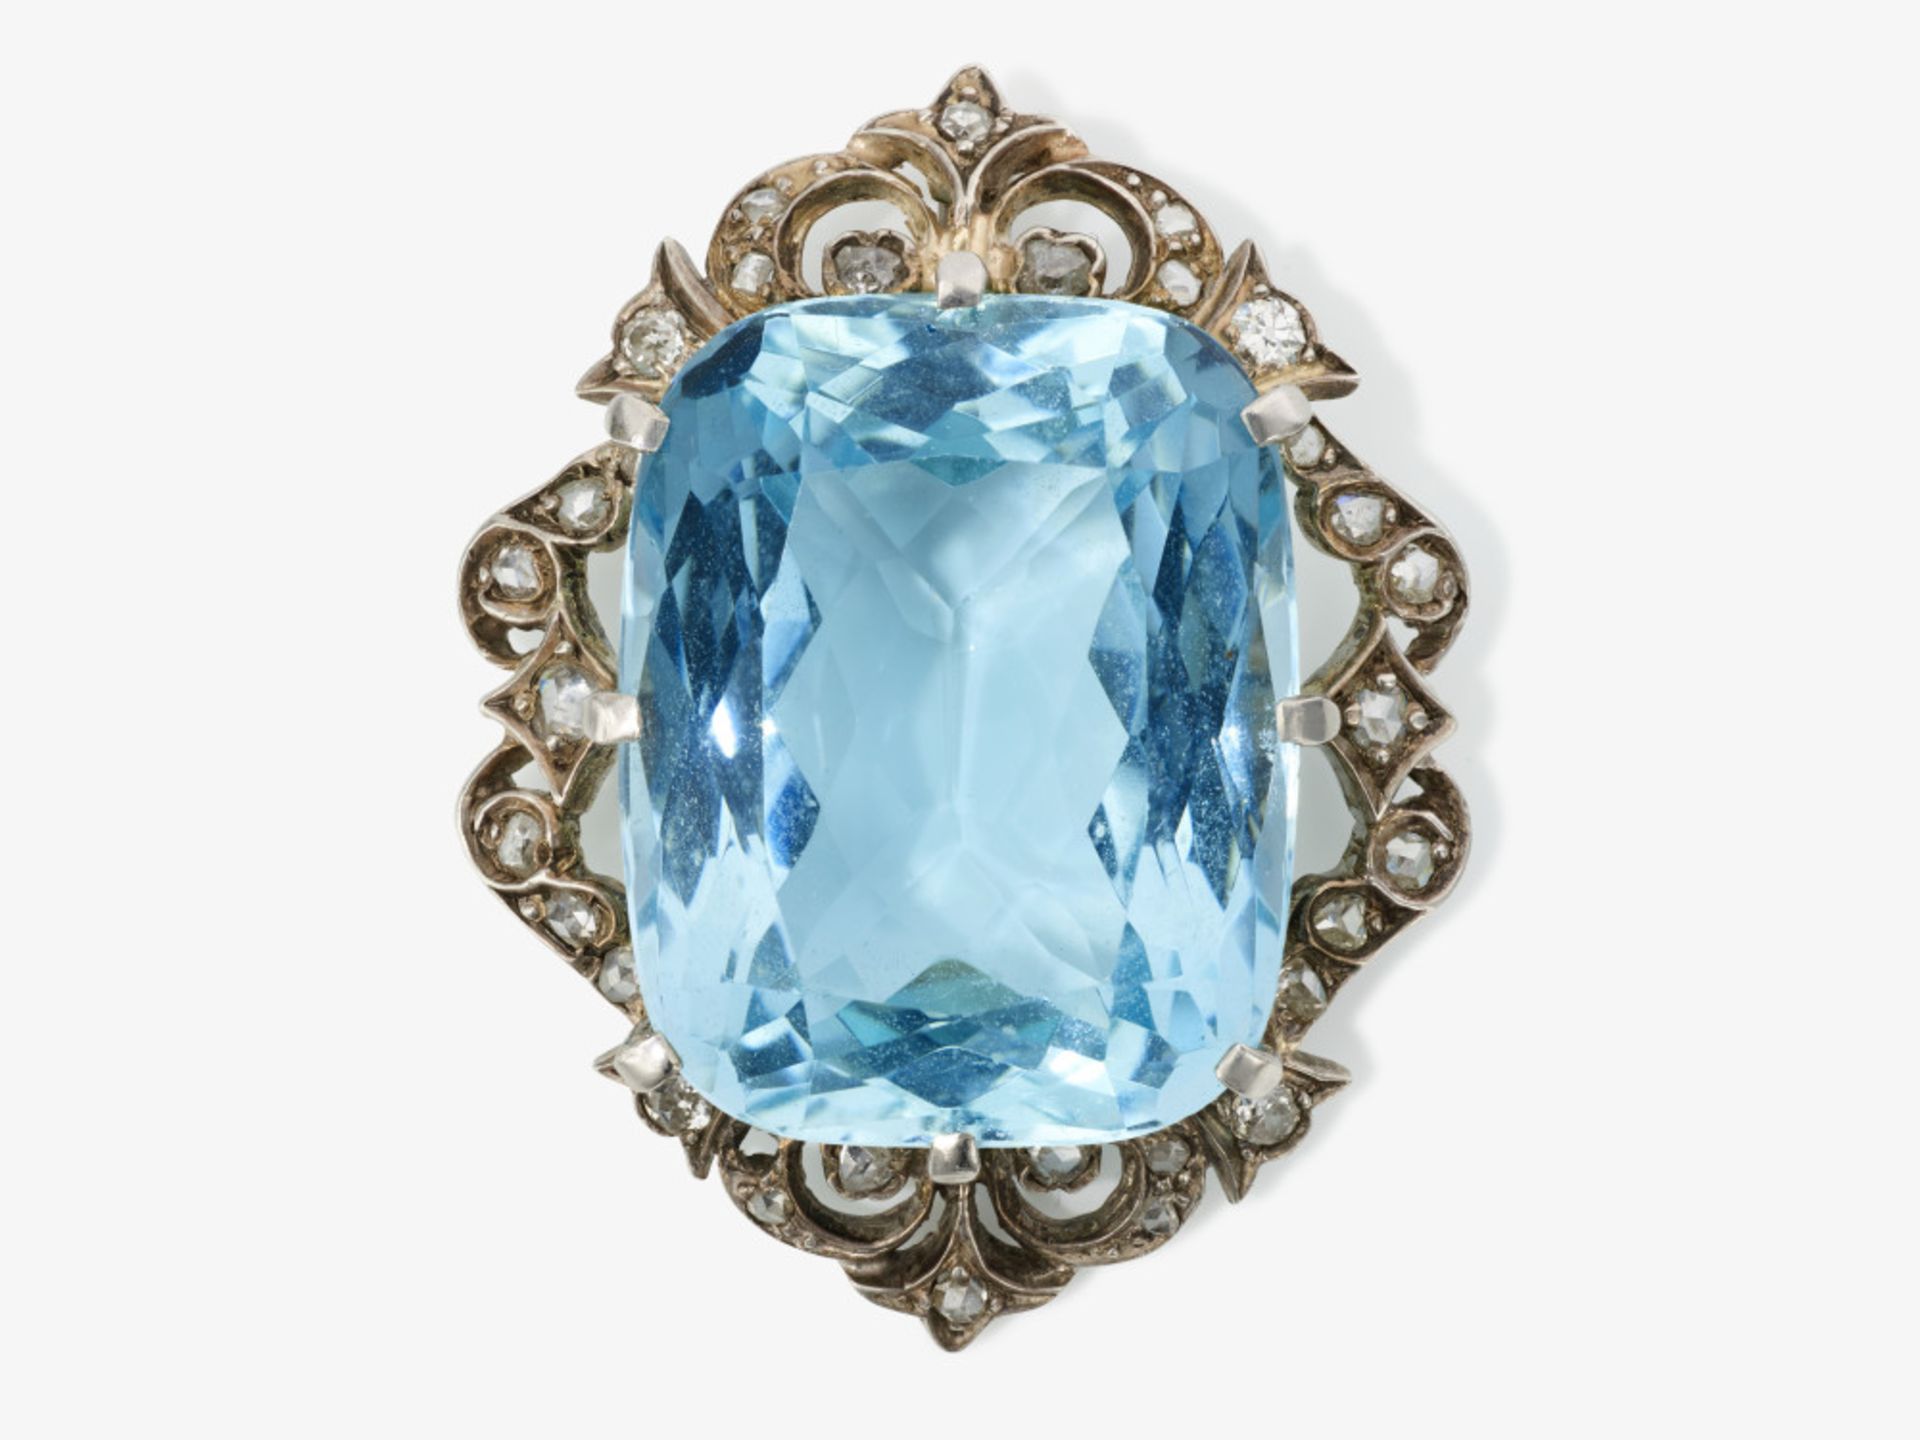 A historical pendant decorated with an azure blue natural aquamarine and diamonds - Probably England